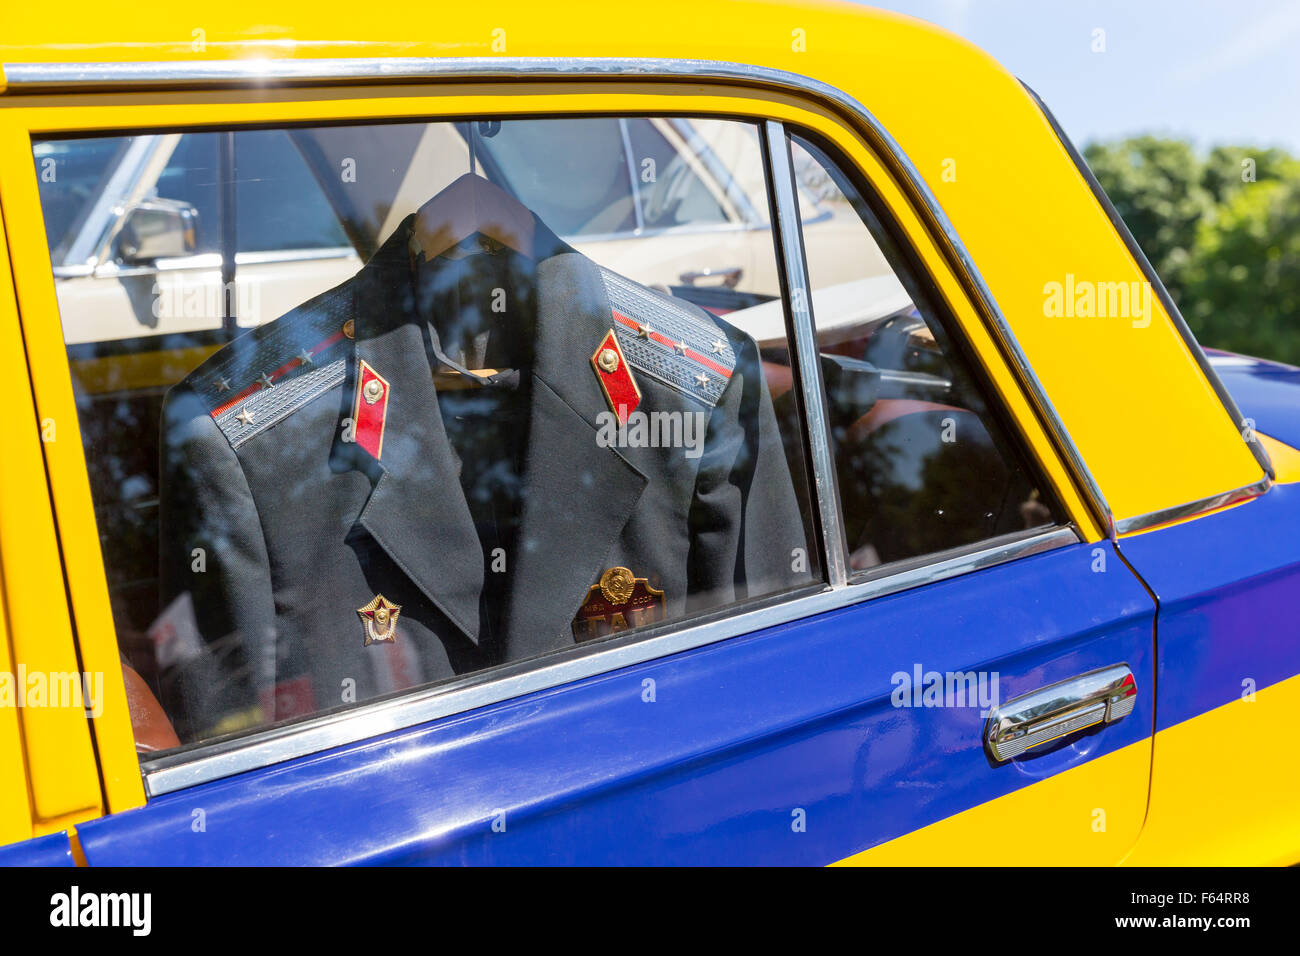 Yellow car with police suit hanging inside Stock Photo